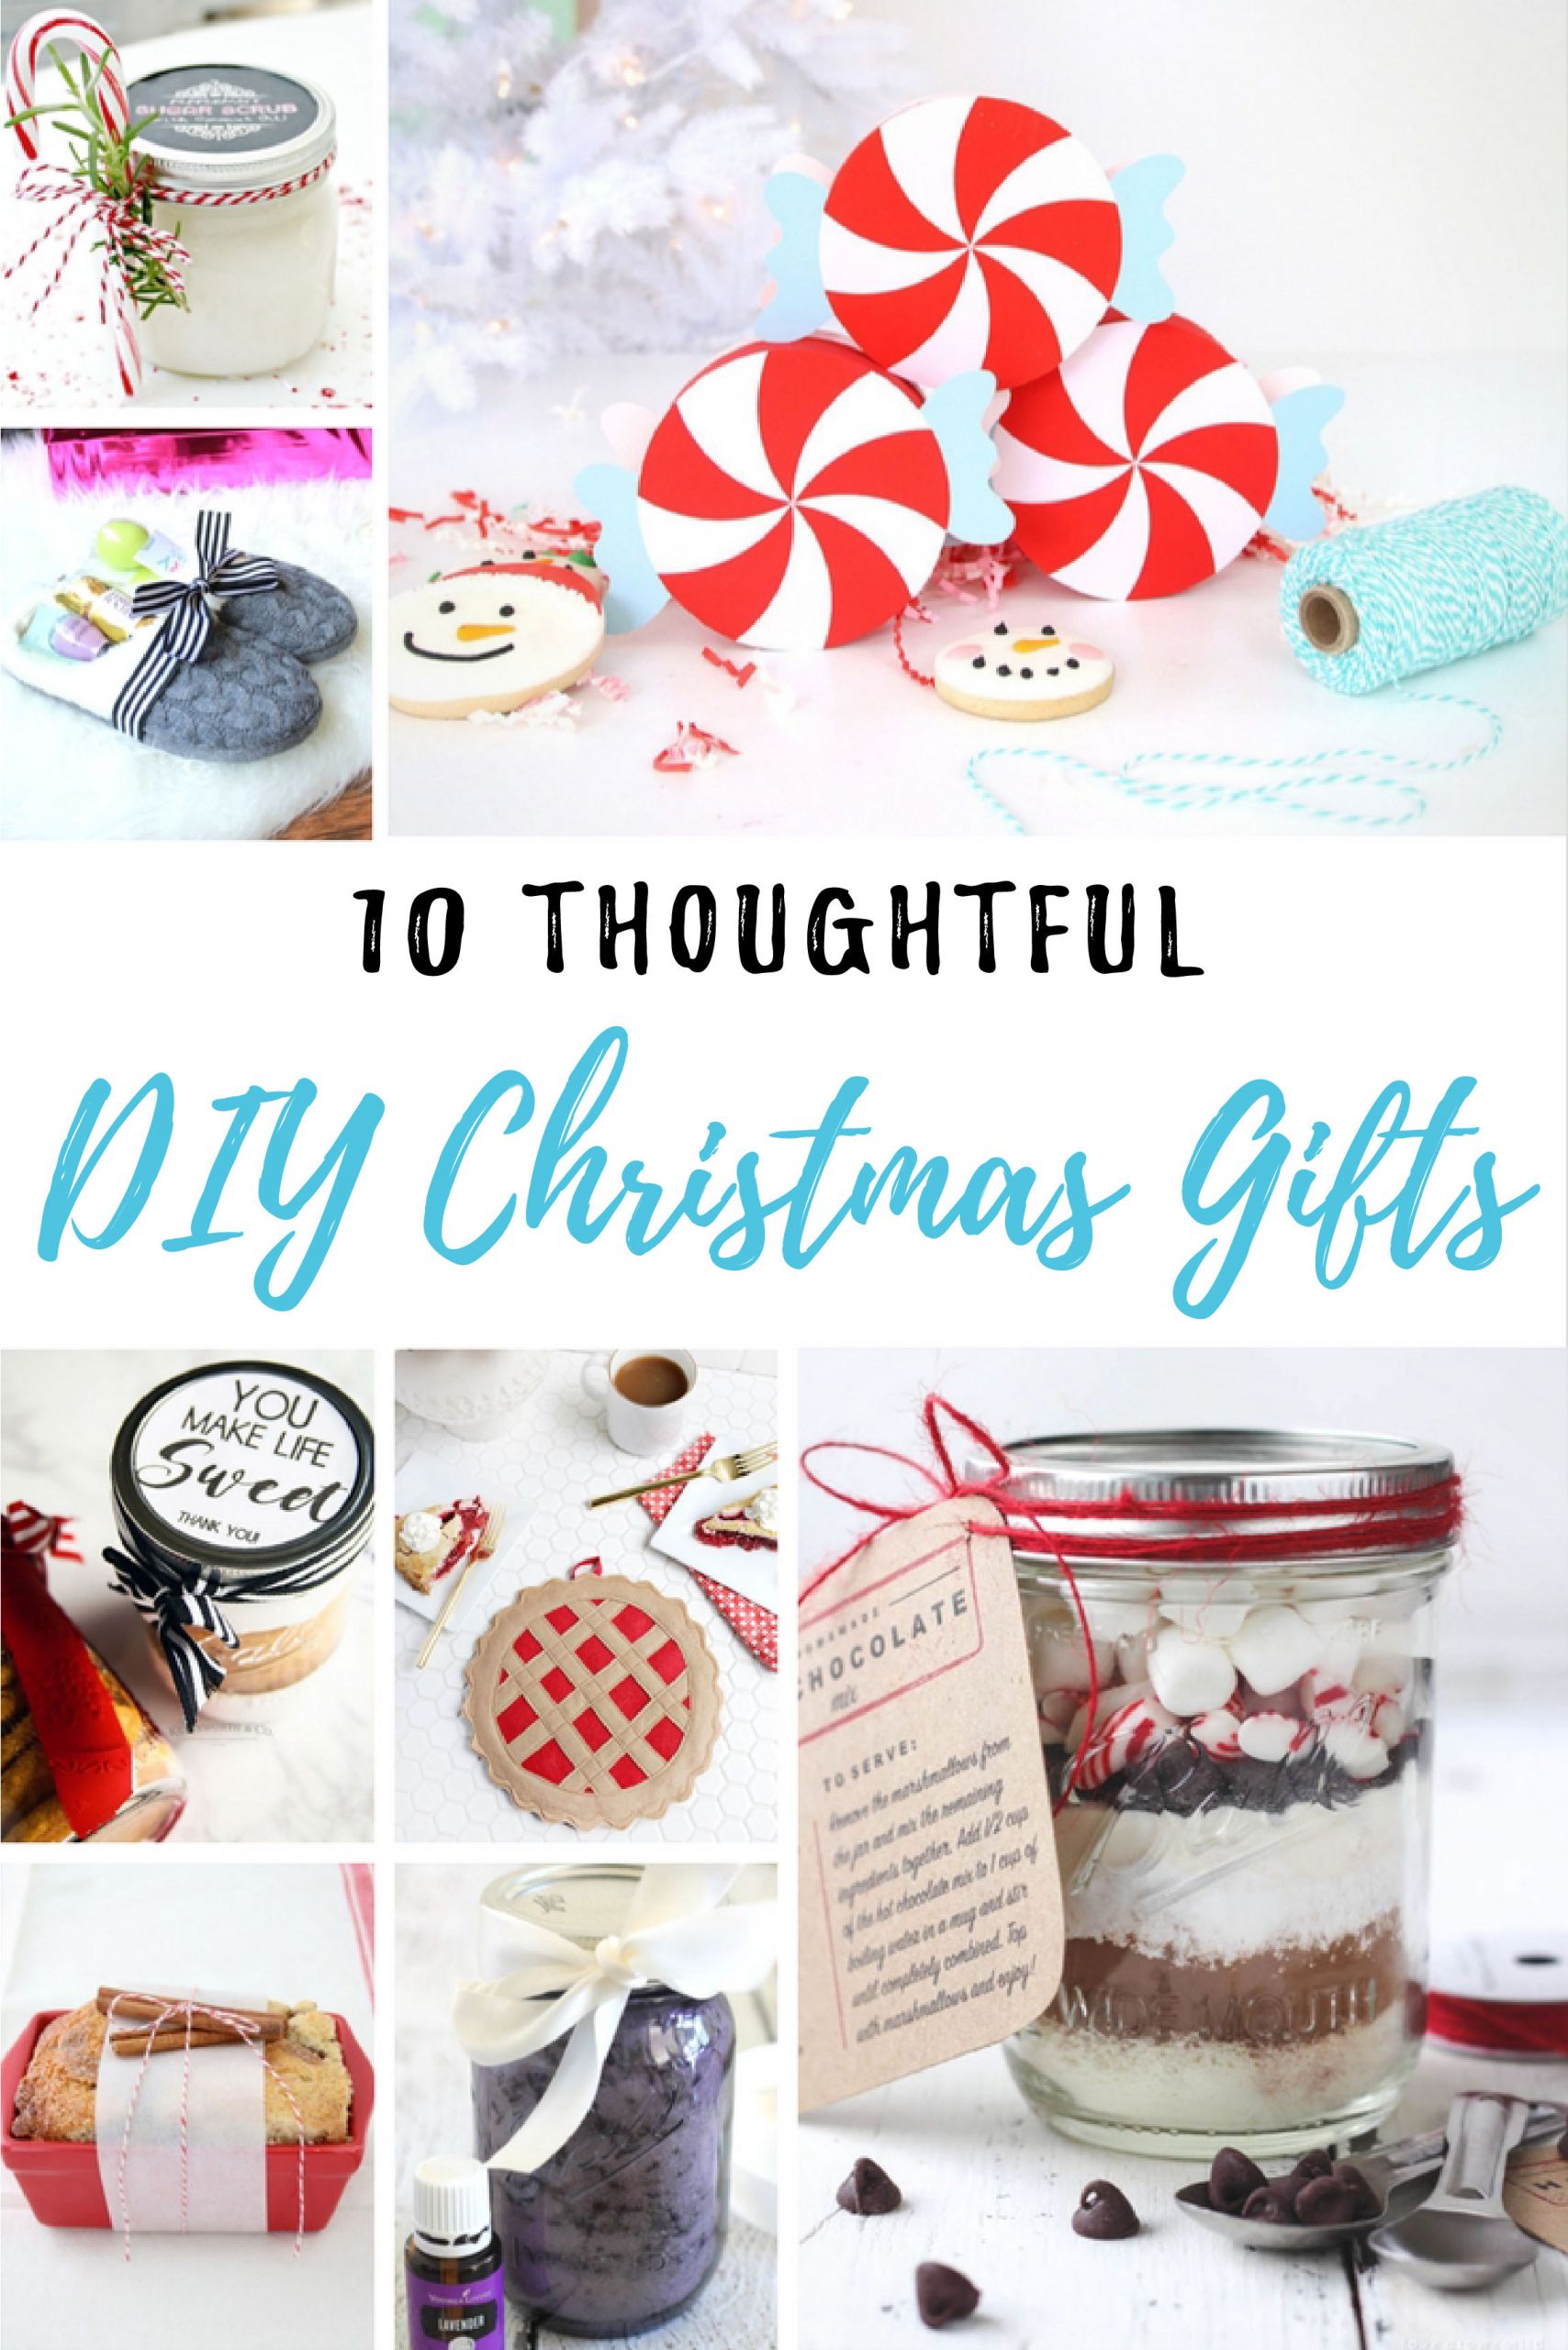 DIY Projects For Christmas Gifts
 10 Thoughtful DIY Christmas Gifts